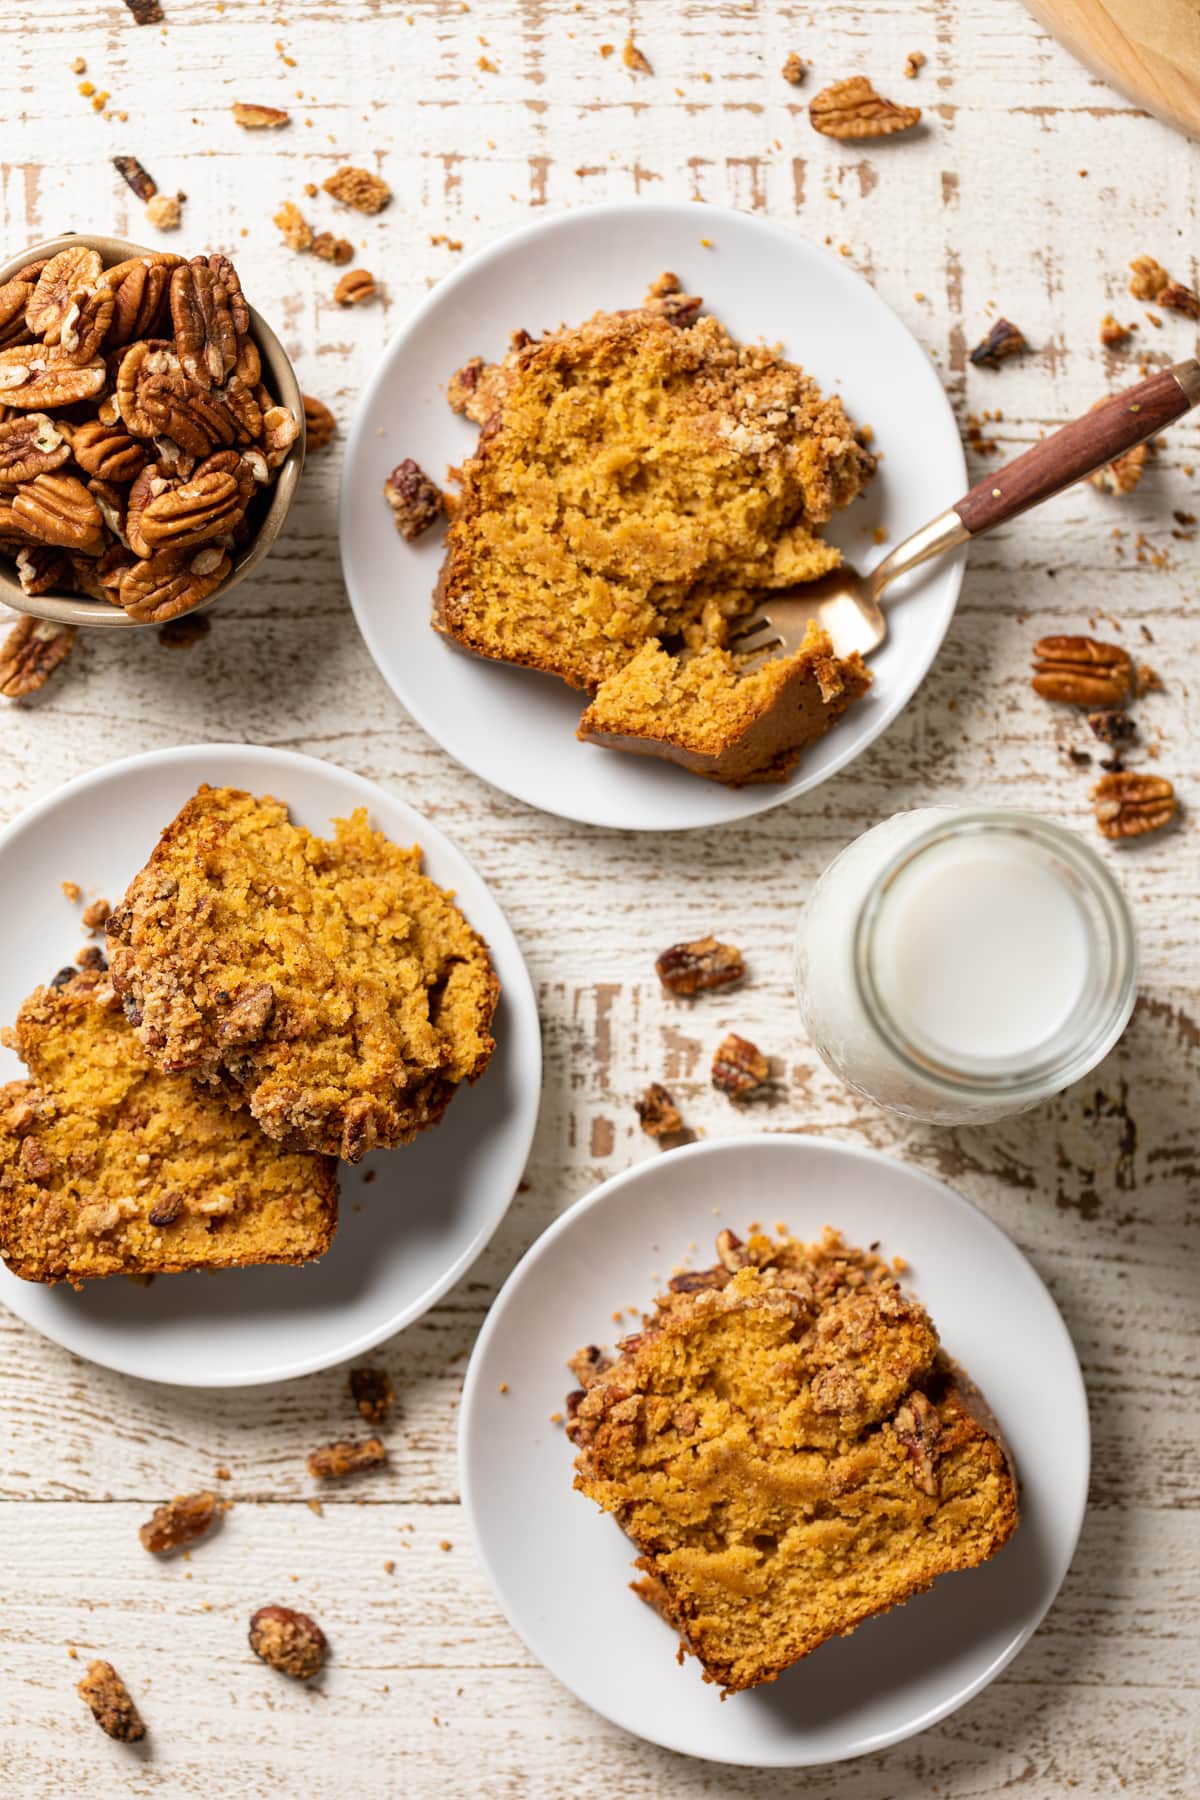 Slices of Vegan Sweet Potato Crumble Bread on small plates on a white table